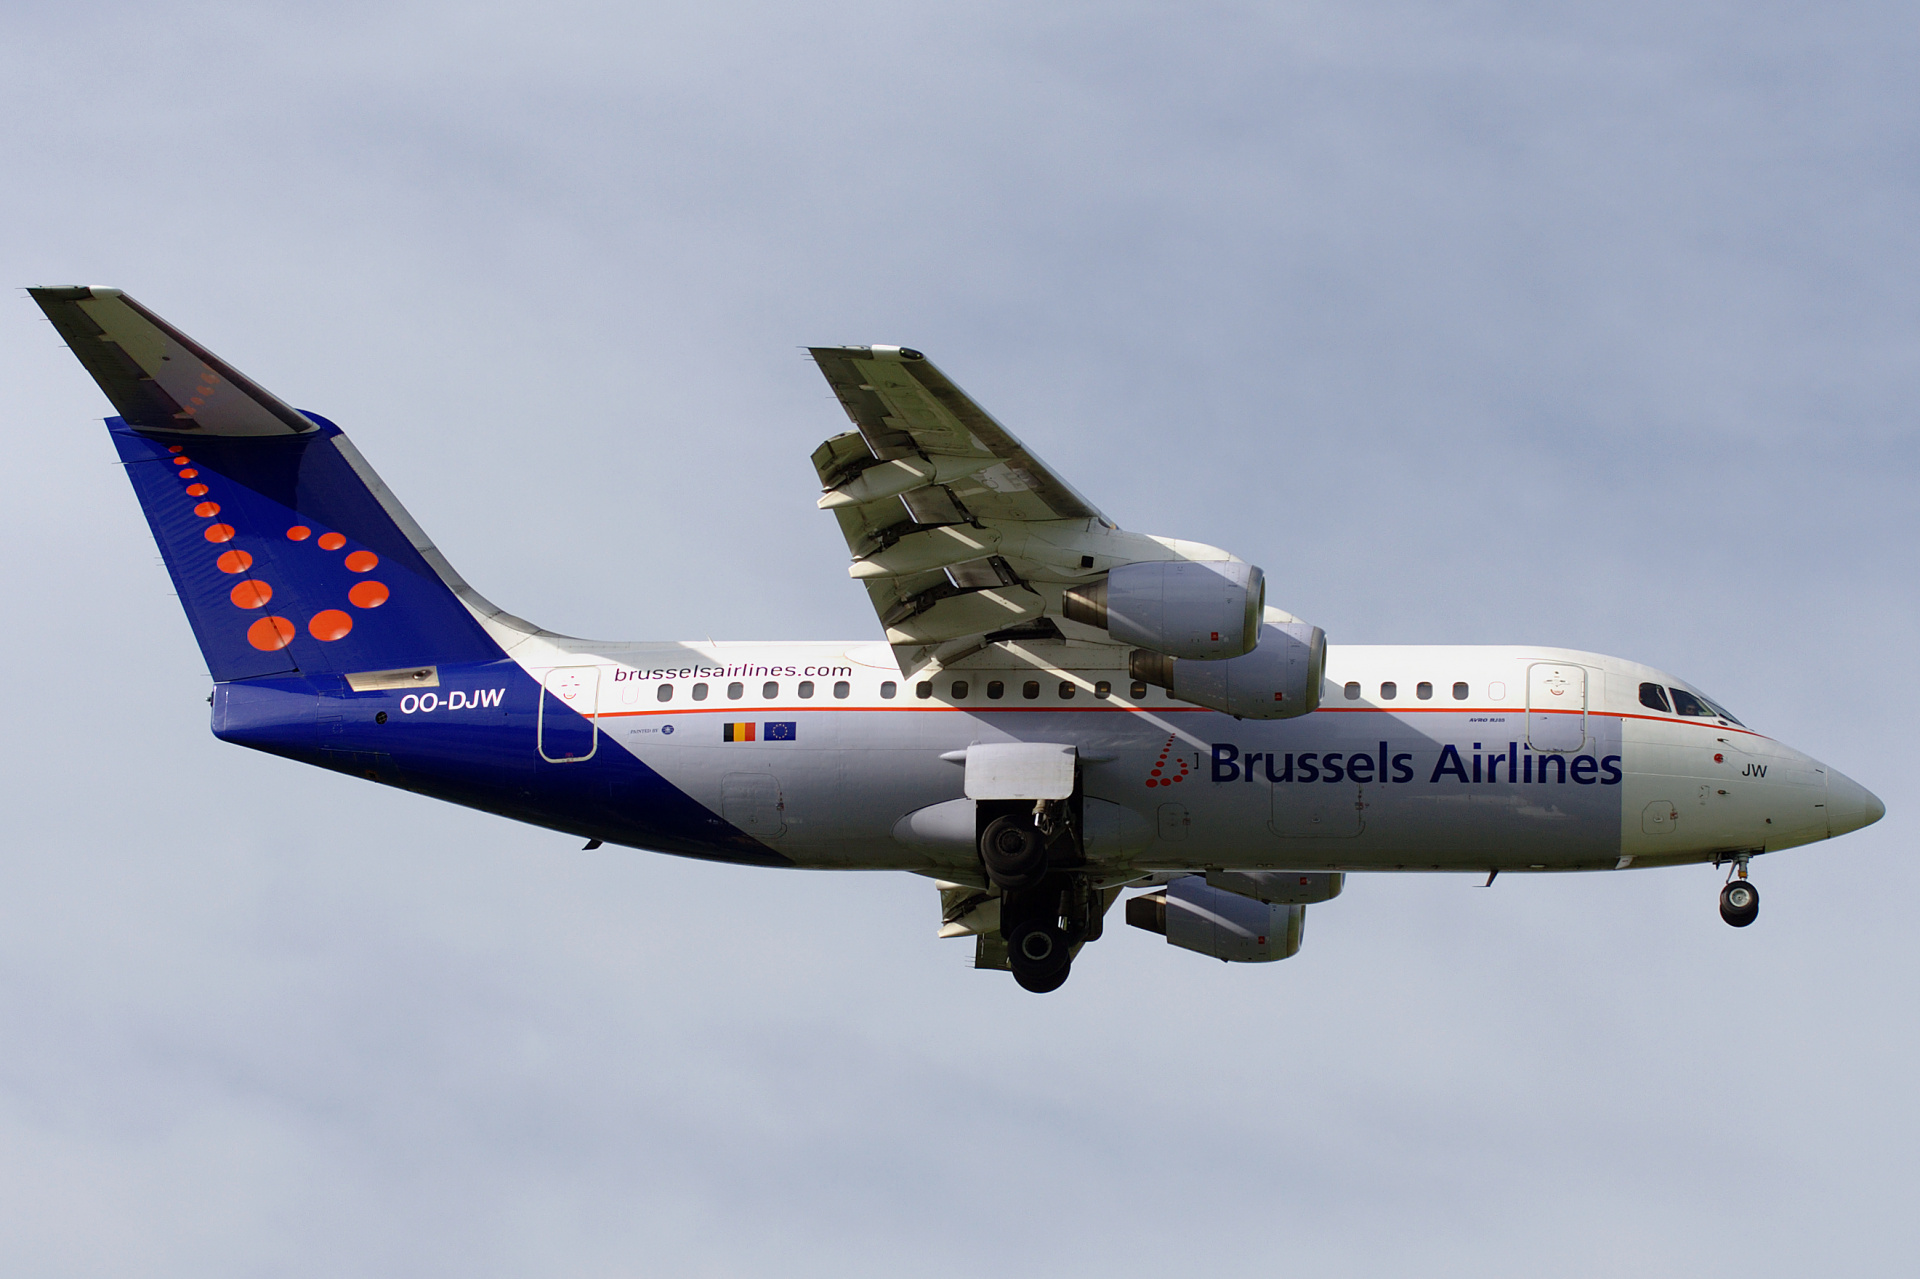 OO-DJW (Aircraft » EPWA Spotting » BAe 146 and revisions » Avro RJ85 » Brussels Airlines)